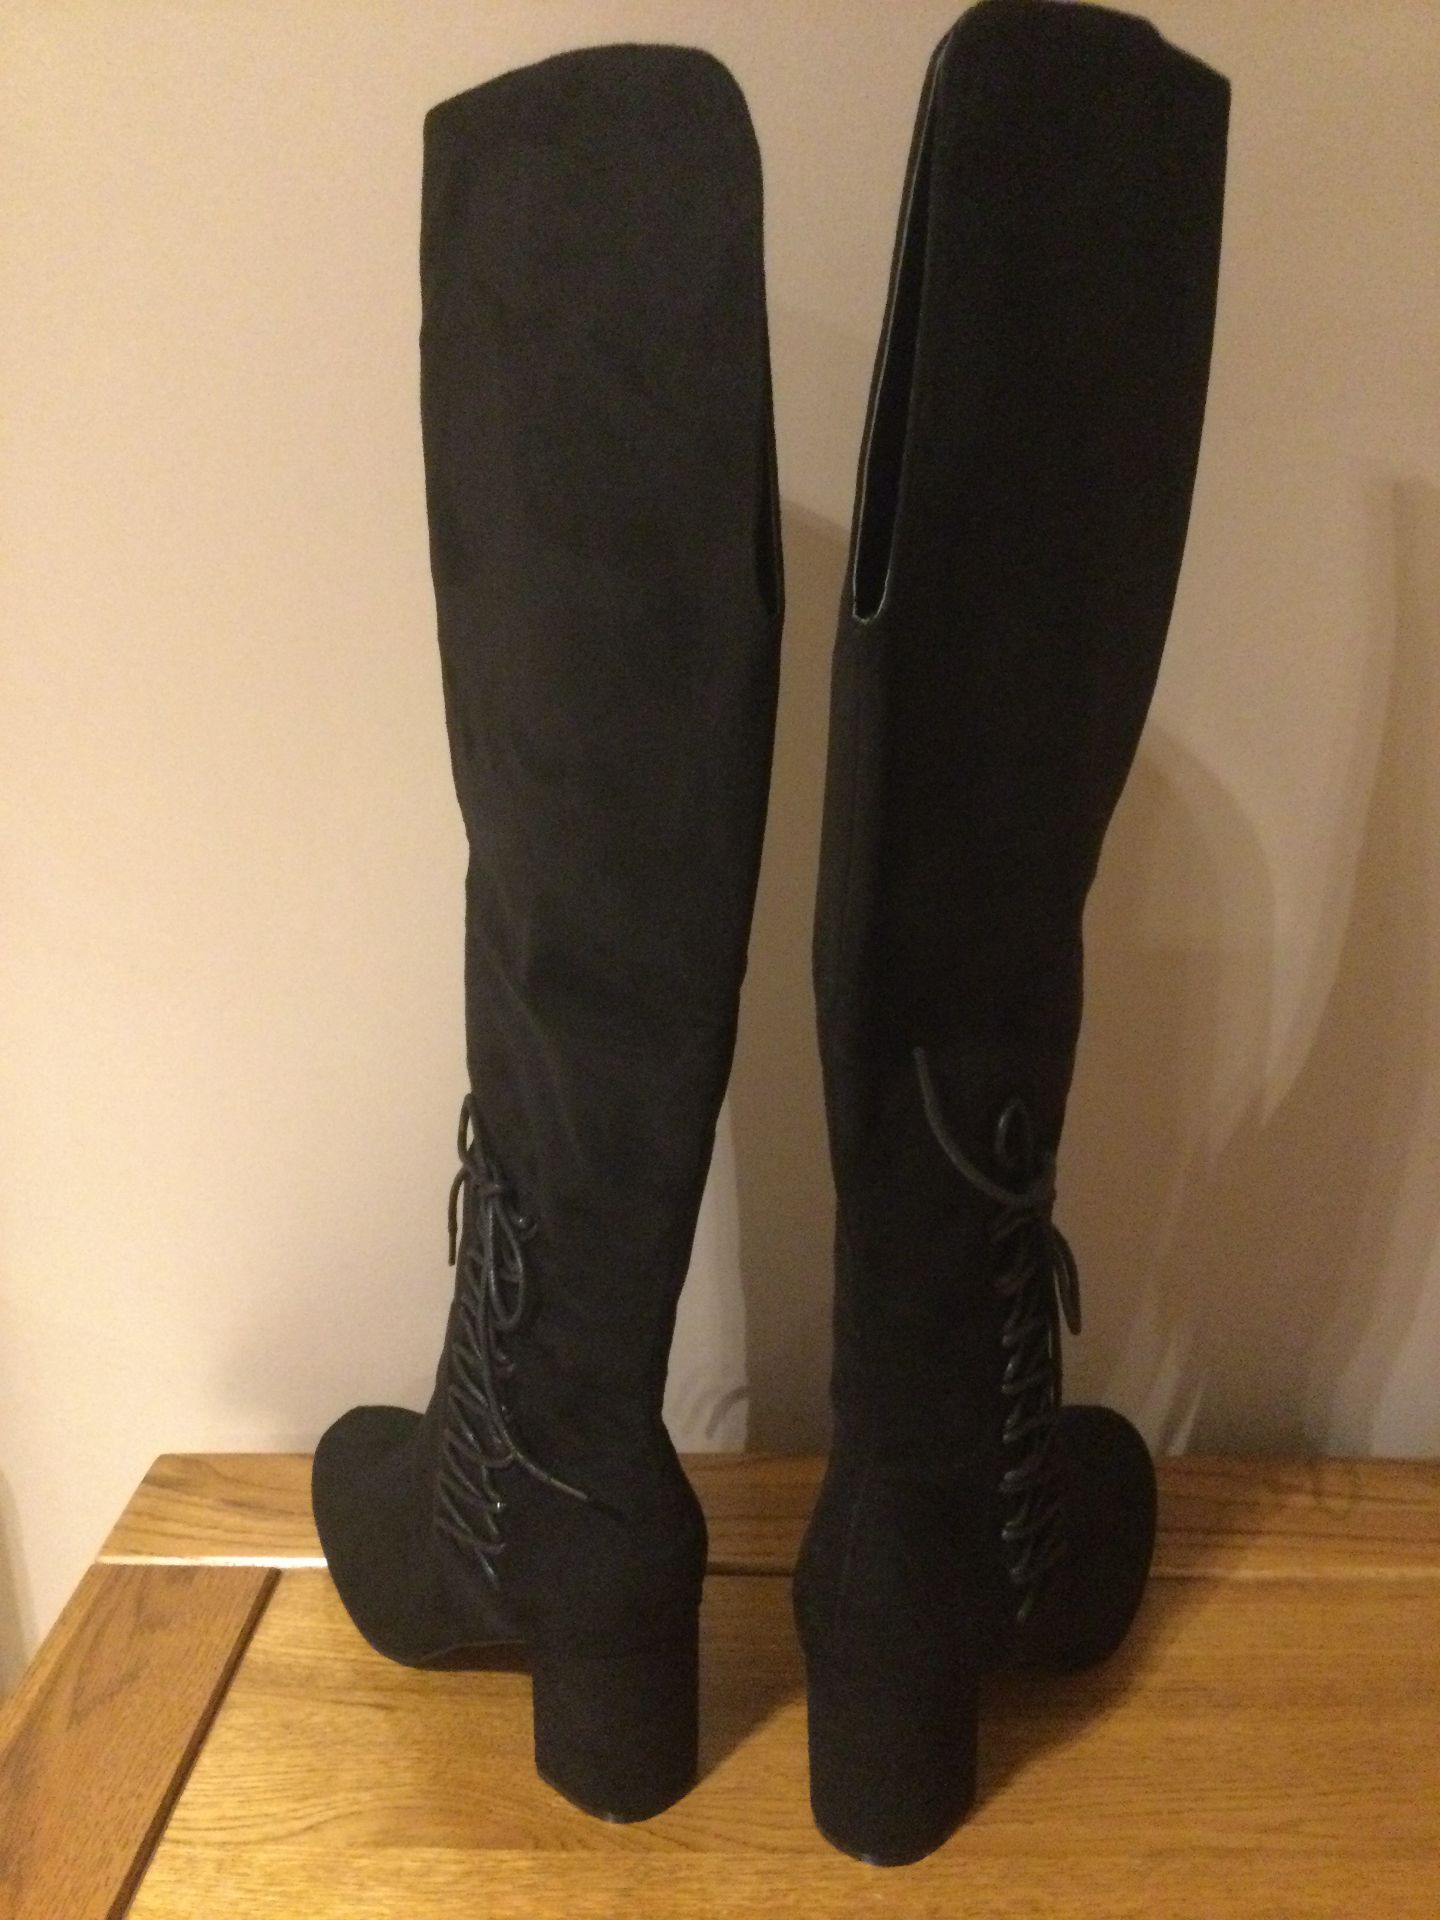 Dolcis “Emma” Long Boots, Block Heel, Size 3, Black - New RRP £55.00 - Image 5 of 7